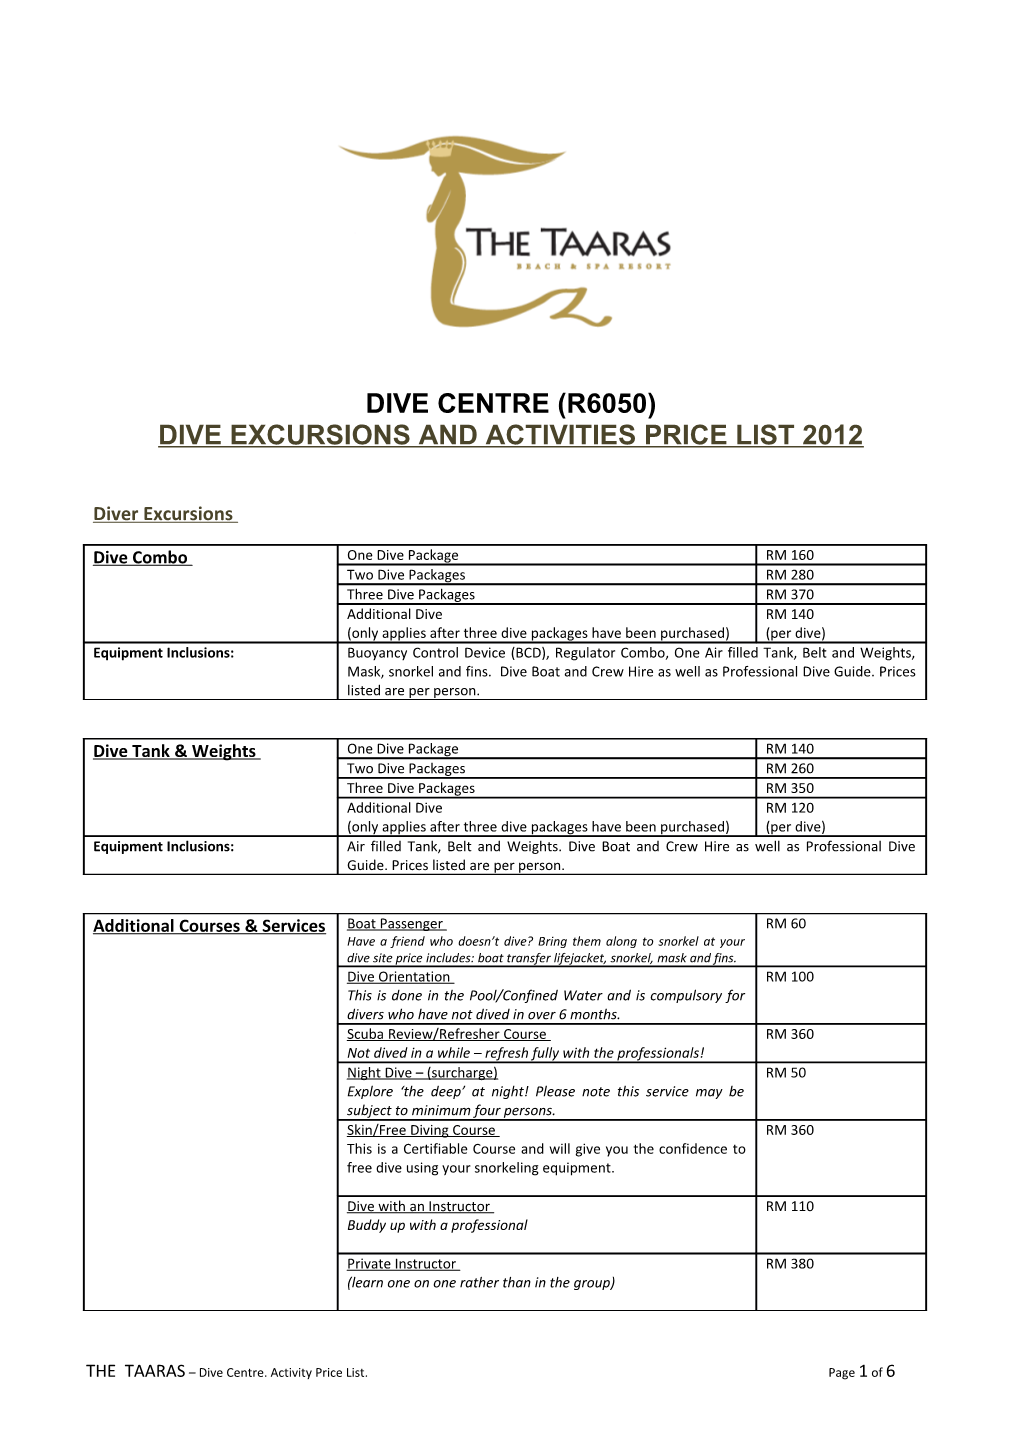 Dive Excursions and Activities Price List 2012